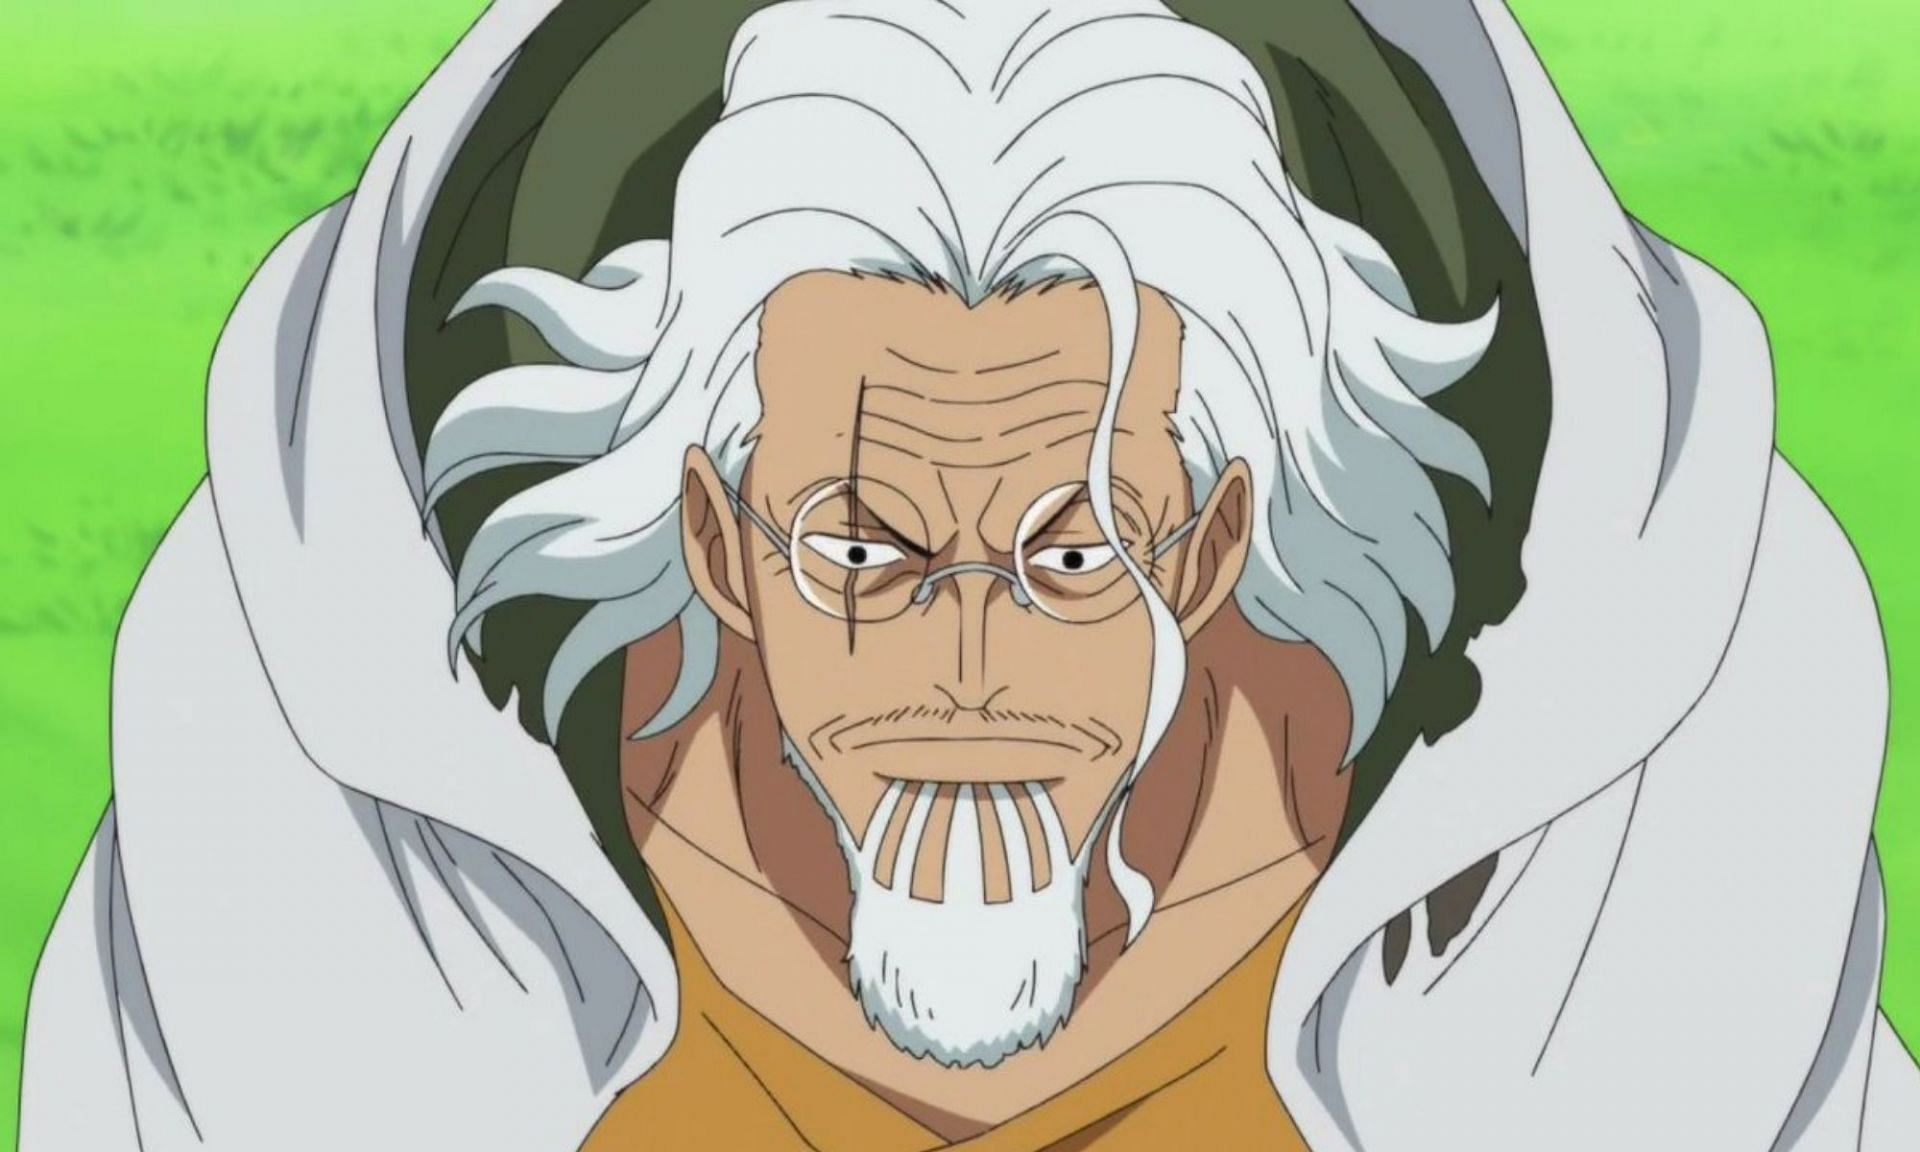 Rayleigh is still a wanted man after Roger died